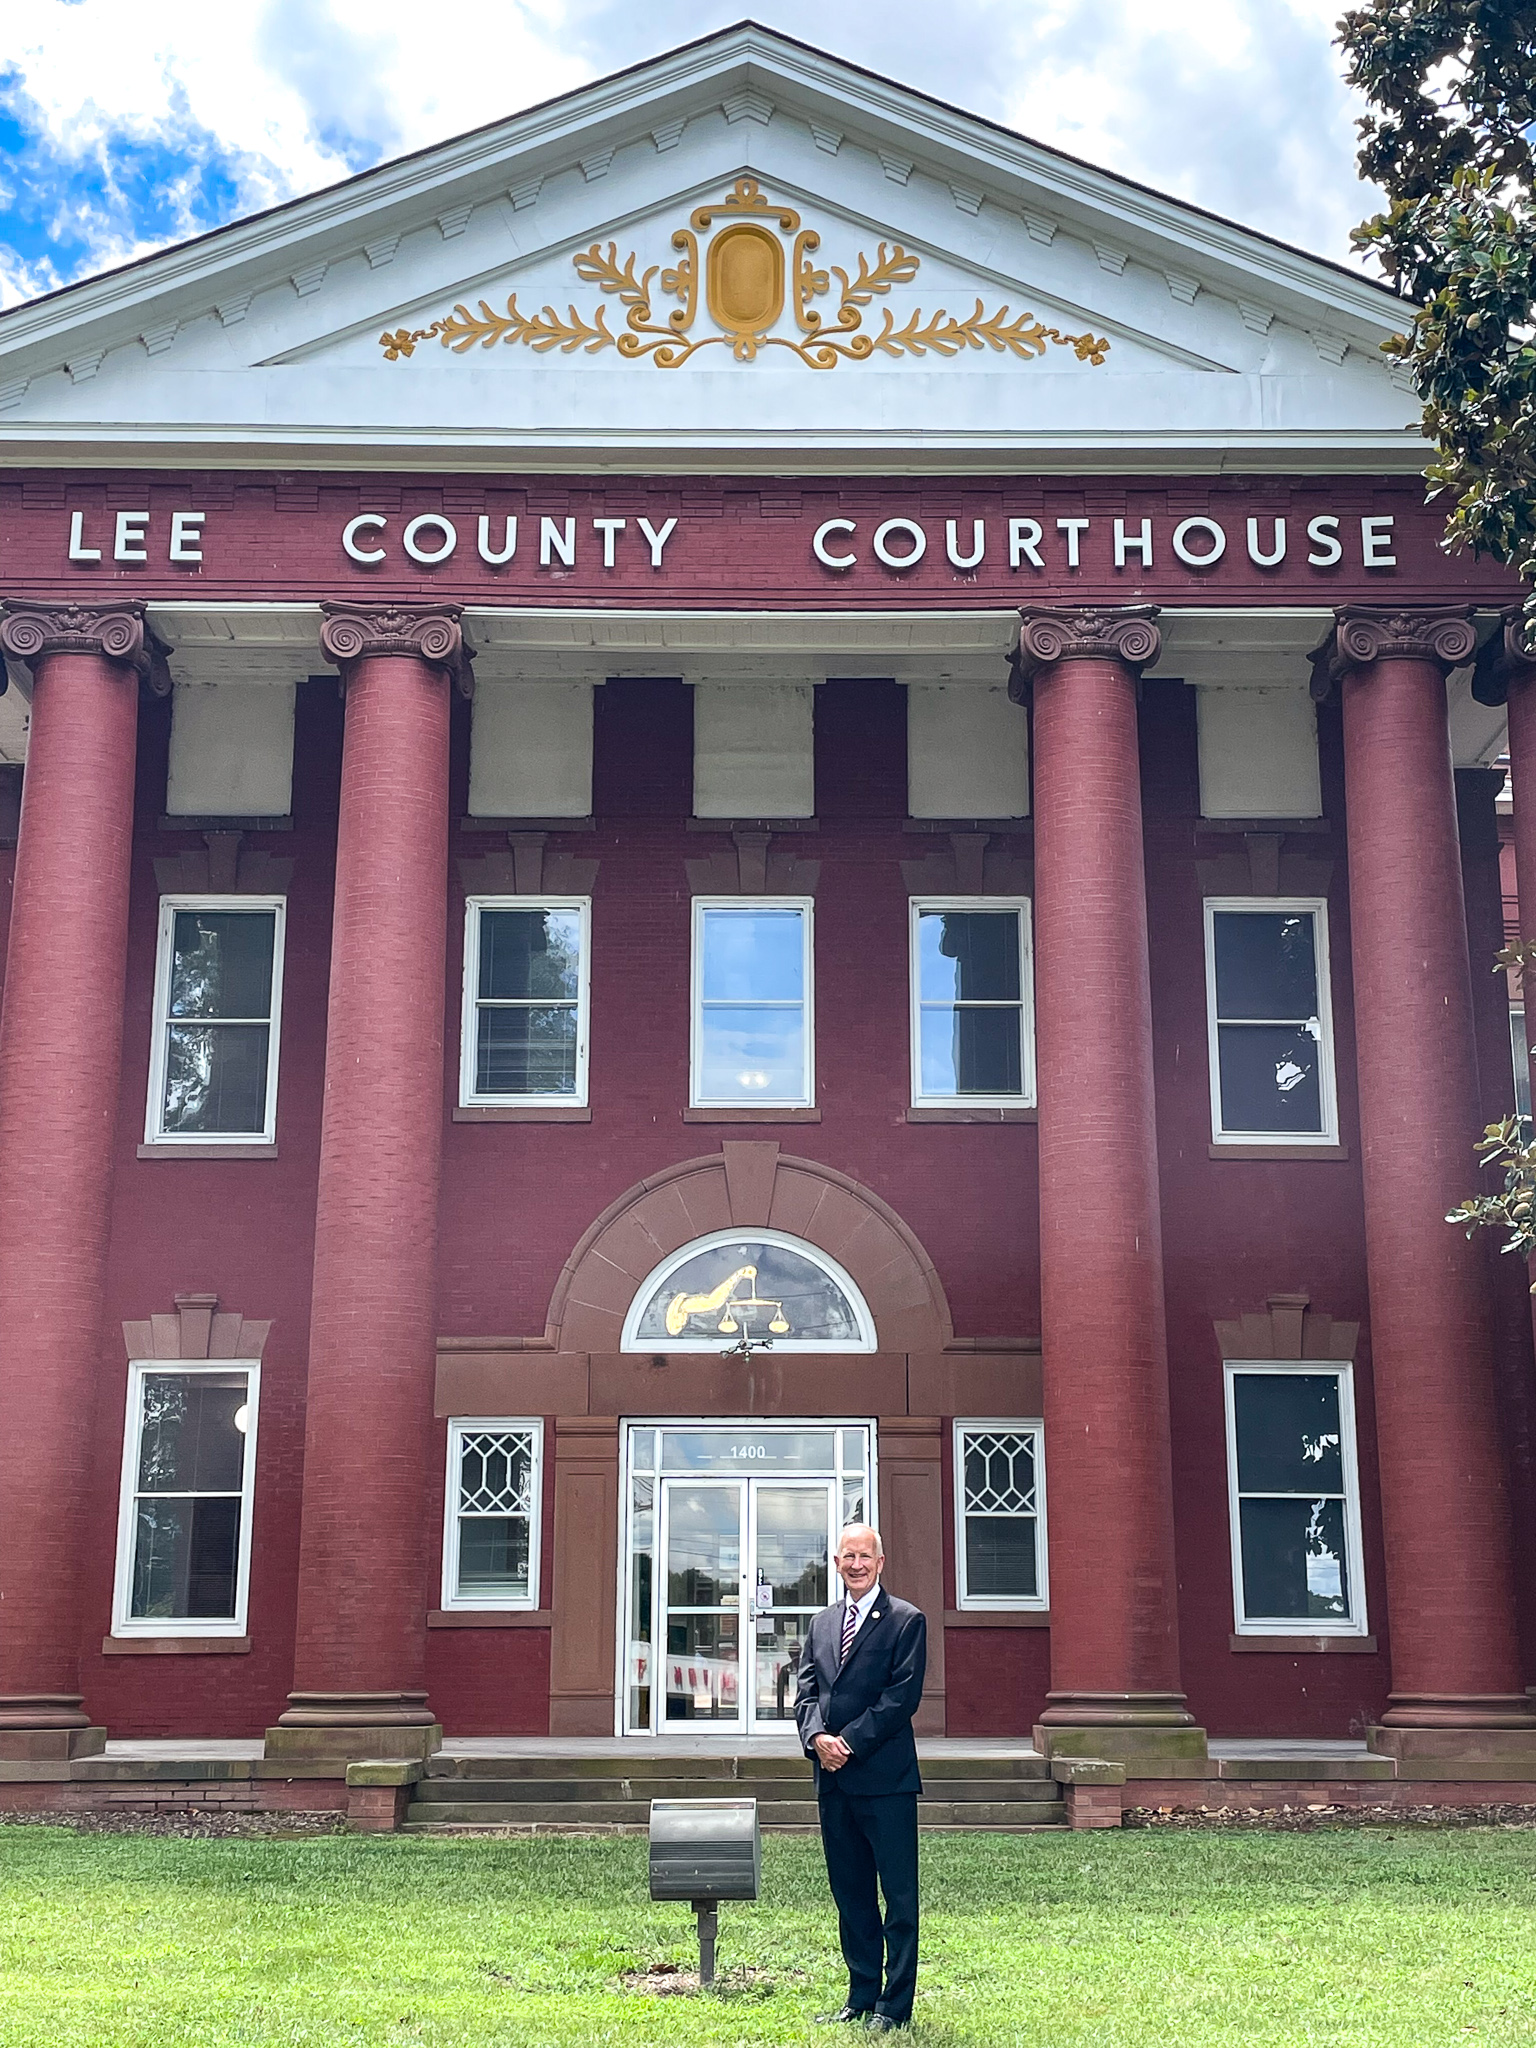 Chief Justice Paul Newby in front of the Lee County Courthouse